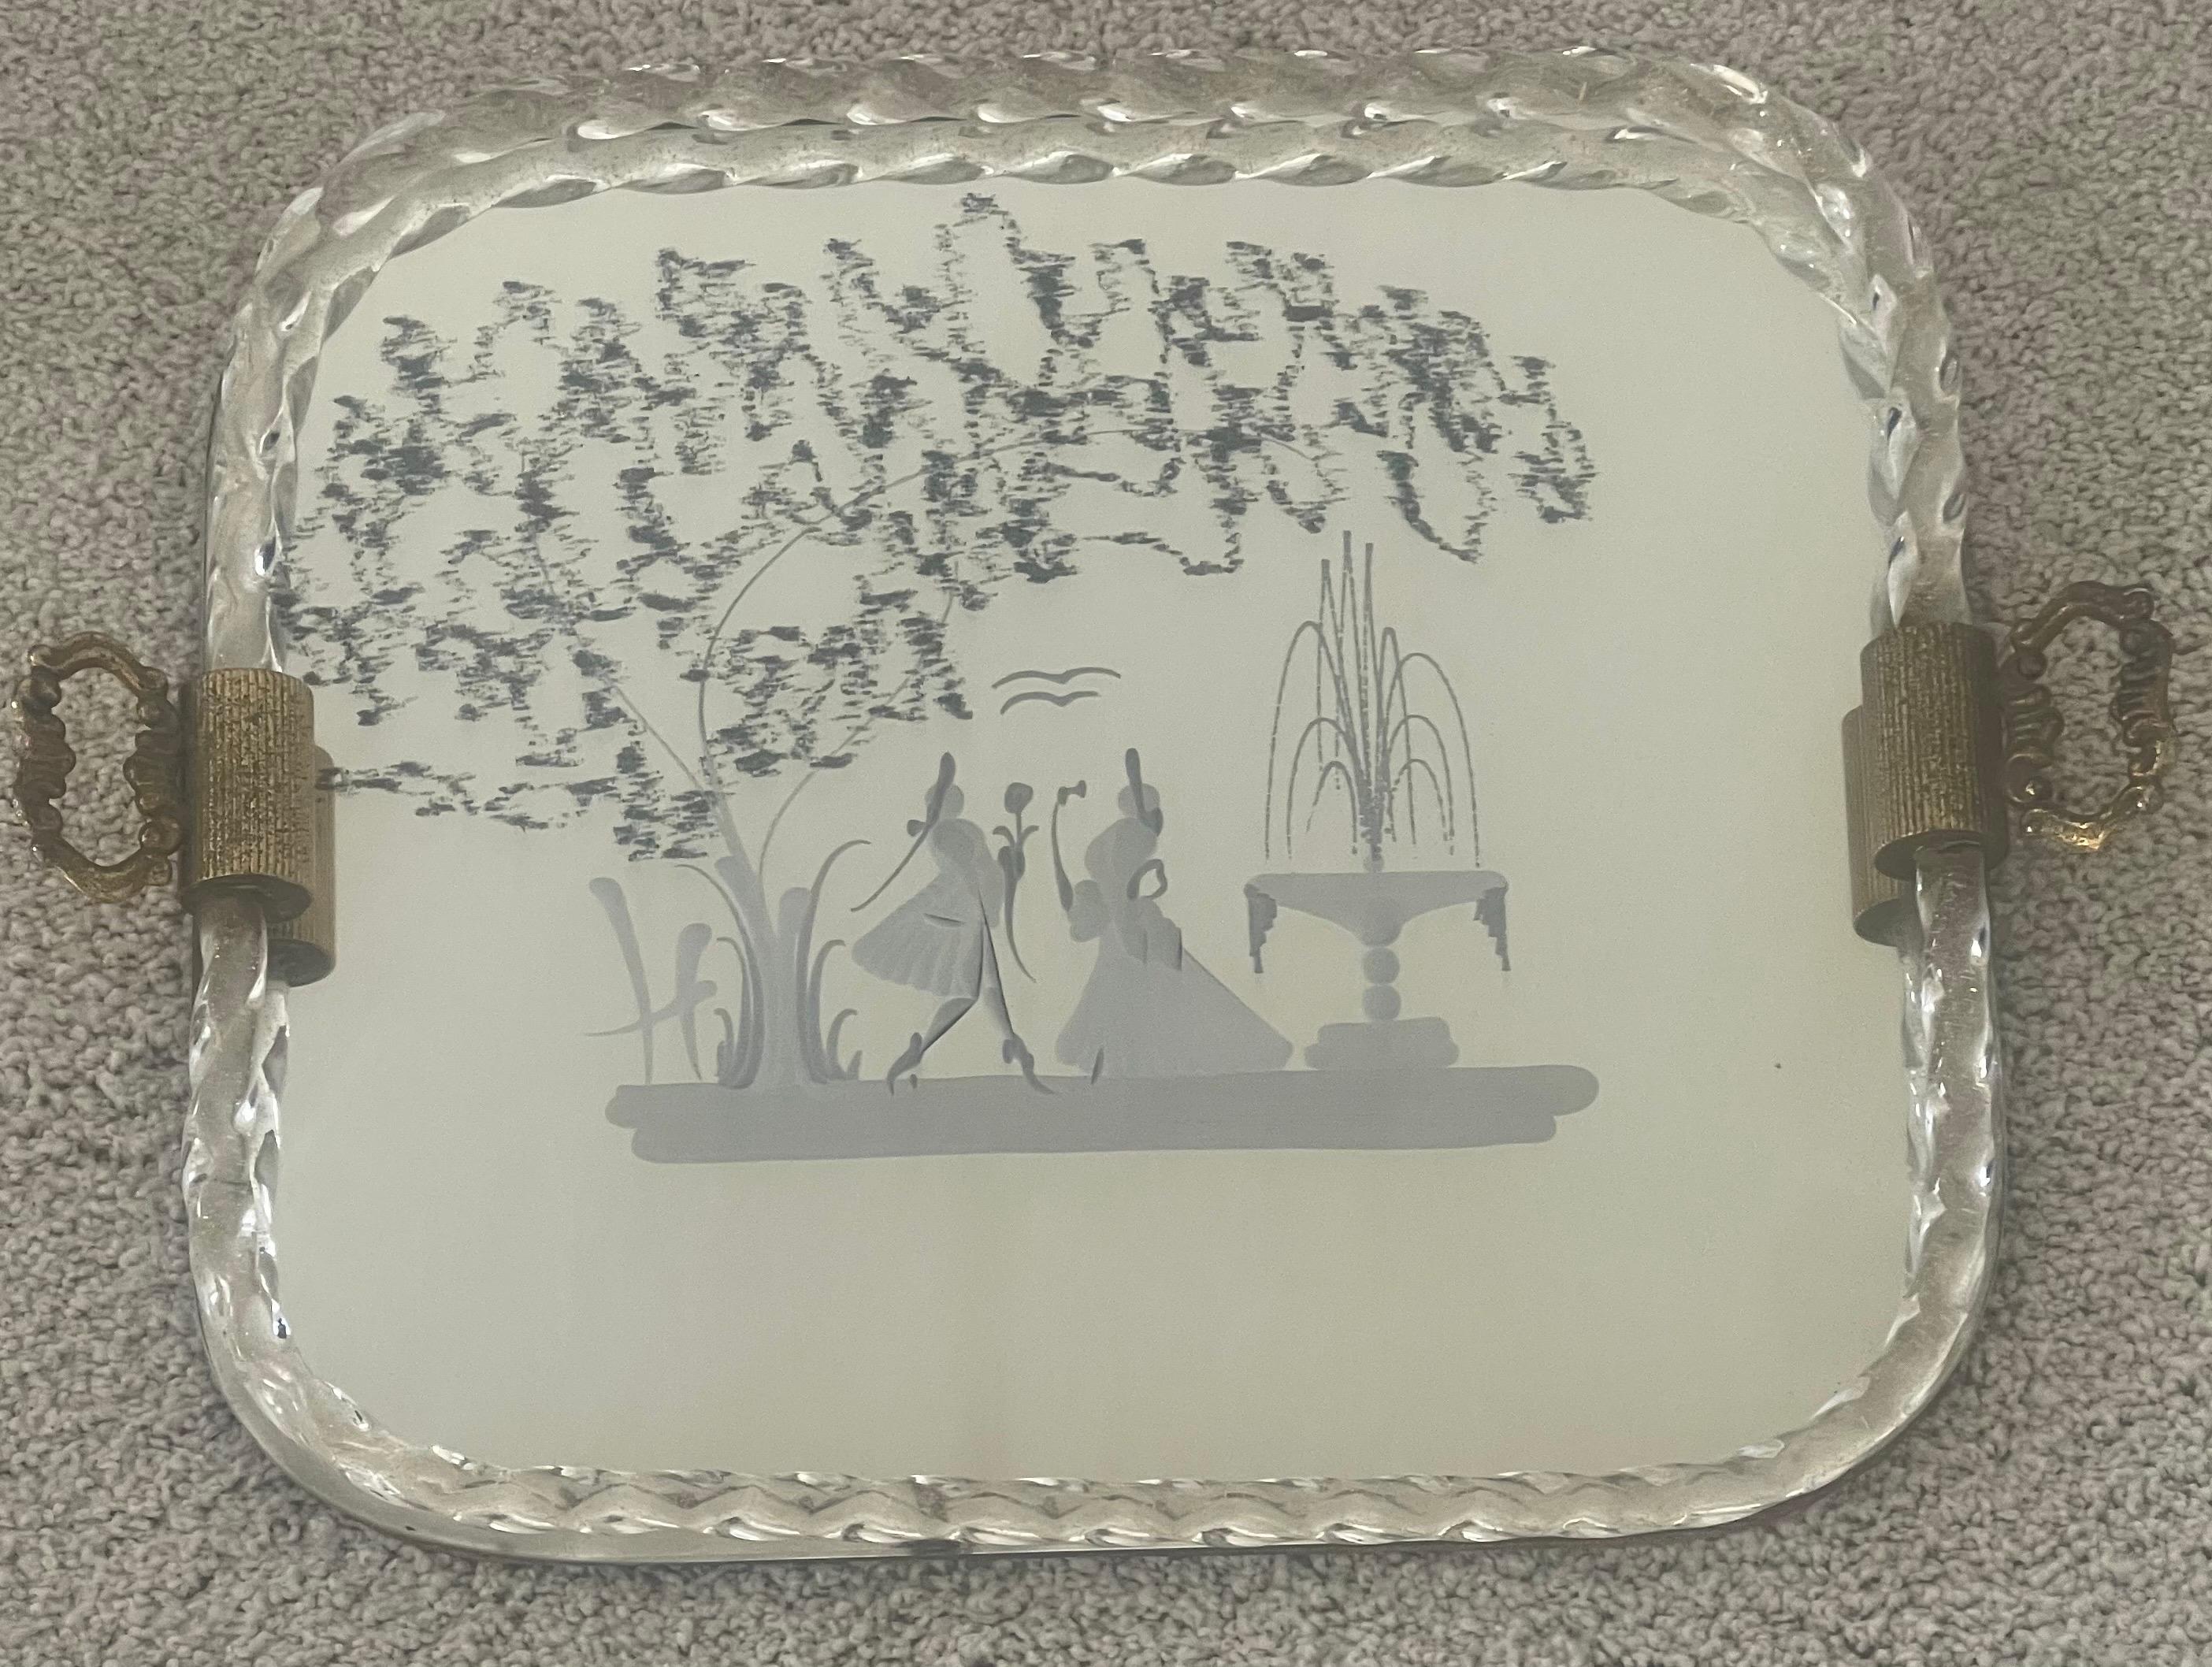 Mirrored Engraved Glass Serving Tray by Ercole Barovier for Murano Glass For Sale 2